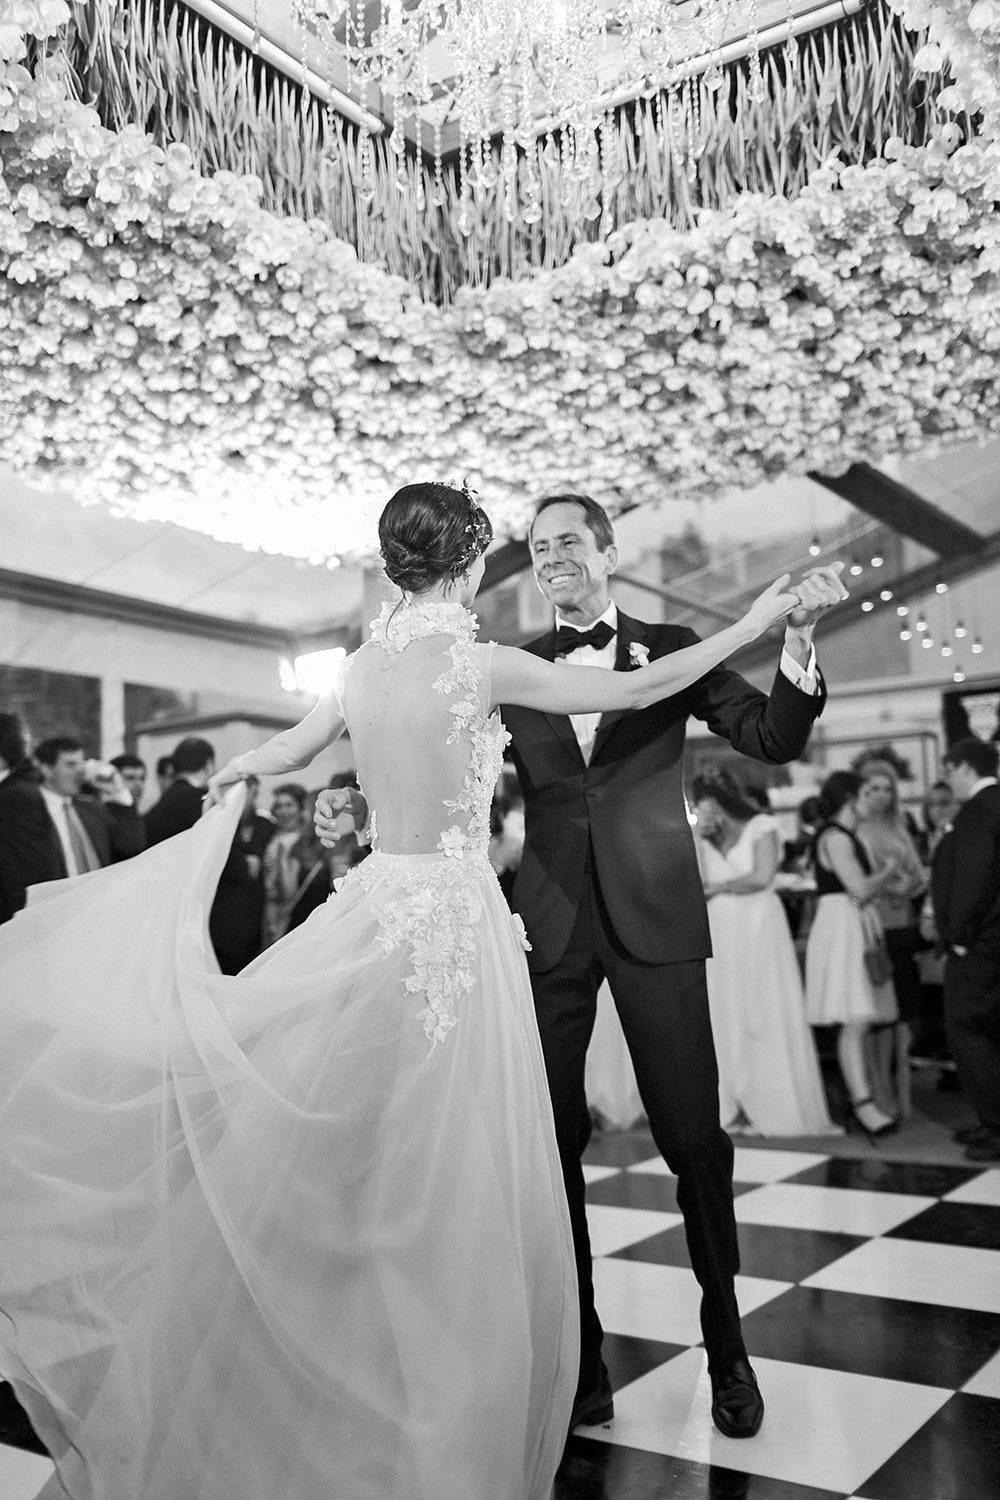 The Top 103 Father Daughter Dance Songs To Play At Your Wedding - Green  Wedding Shoes